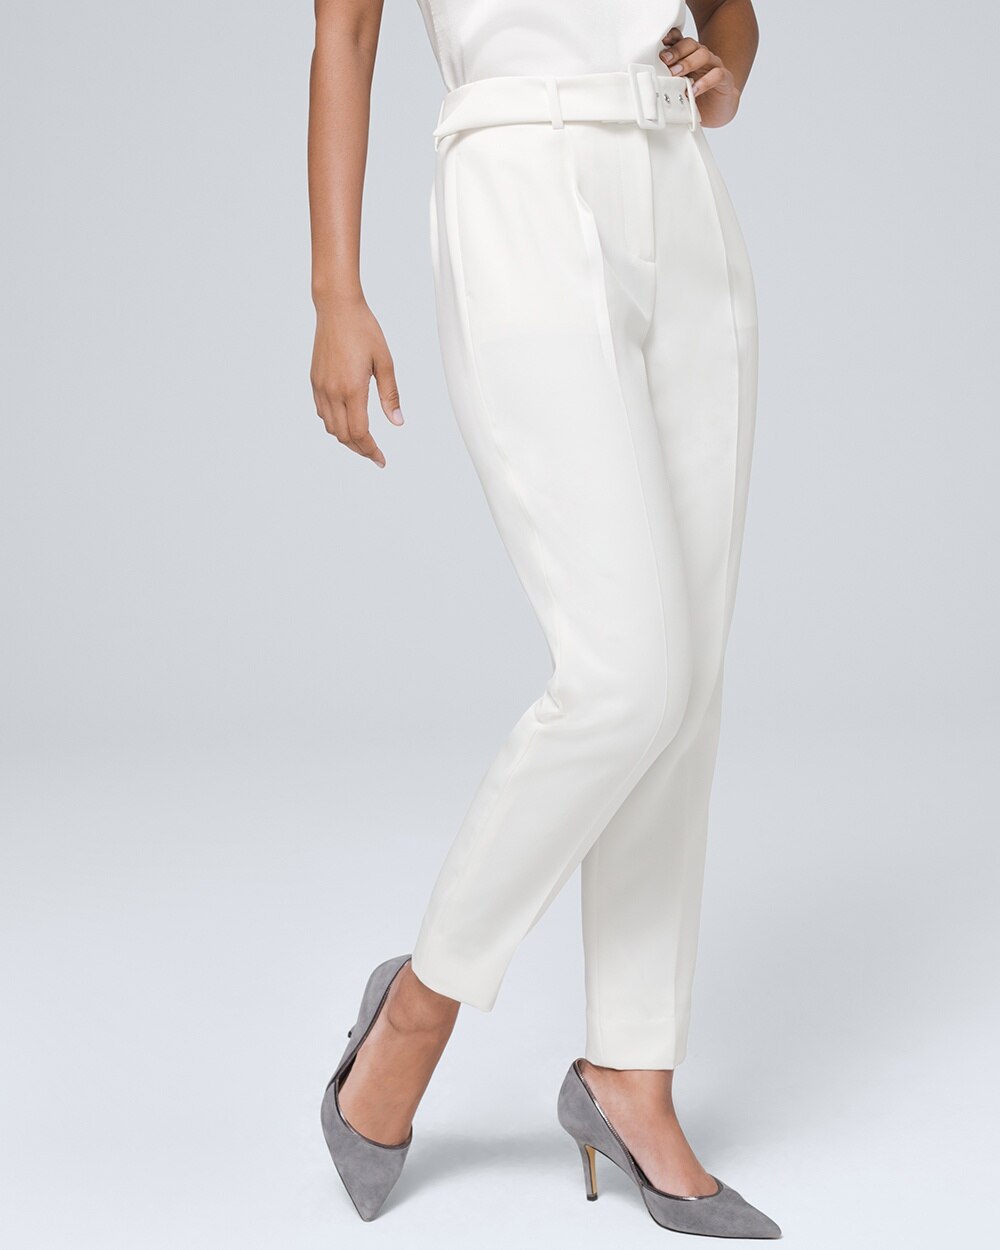 ankle white pants